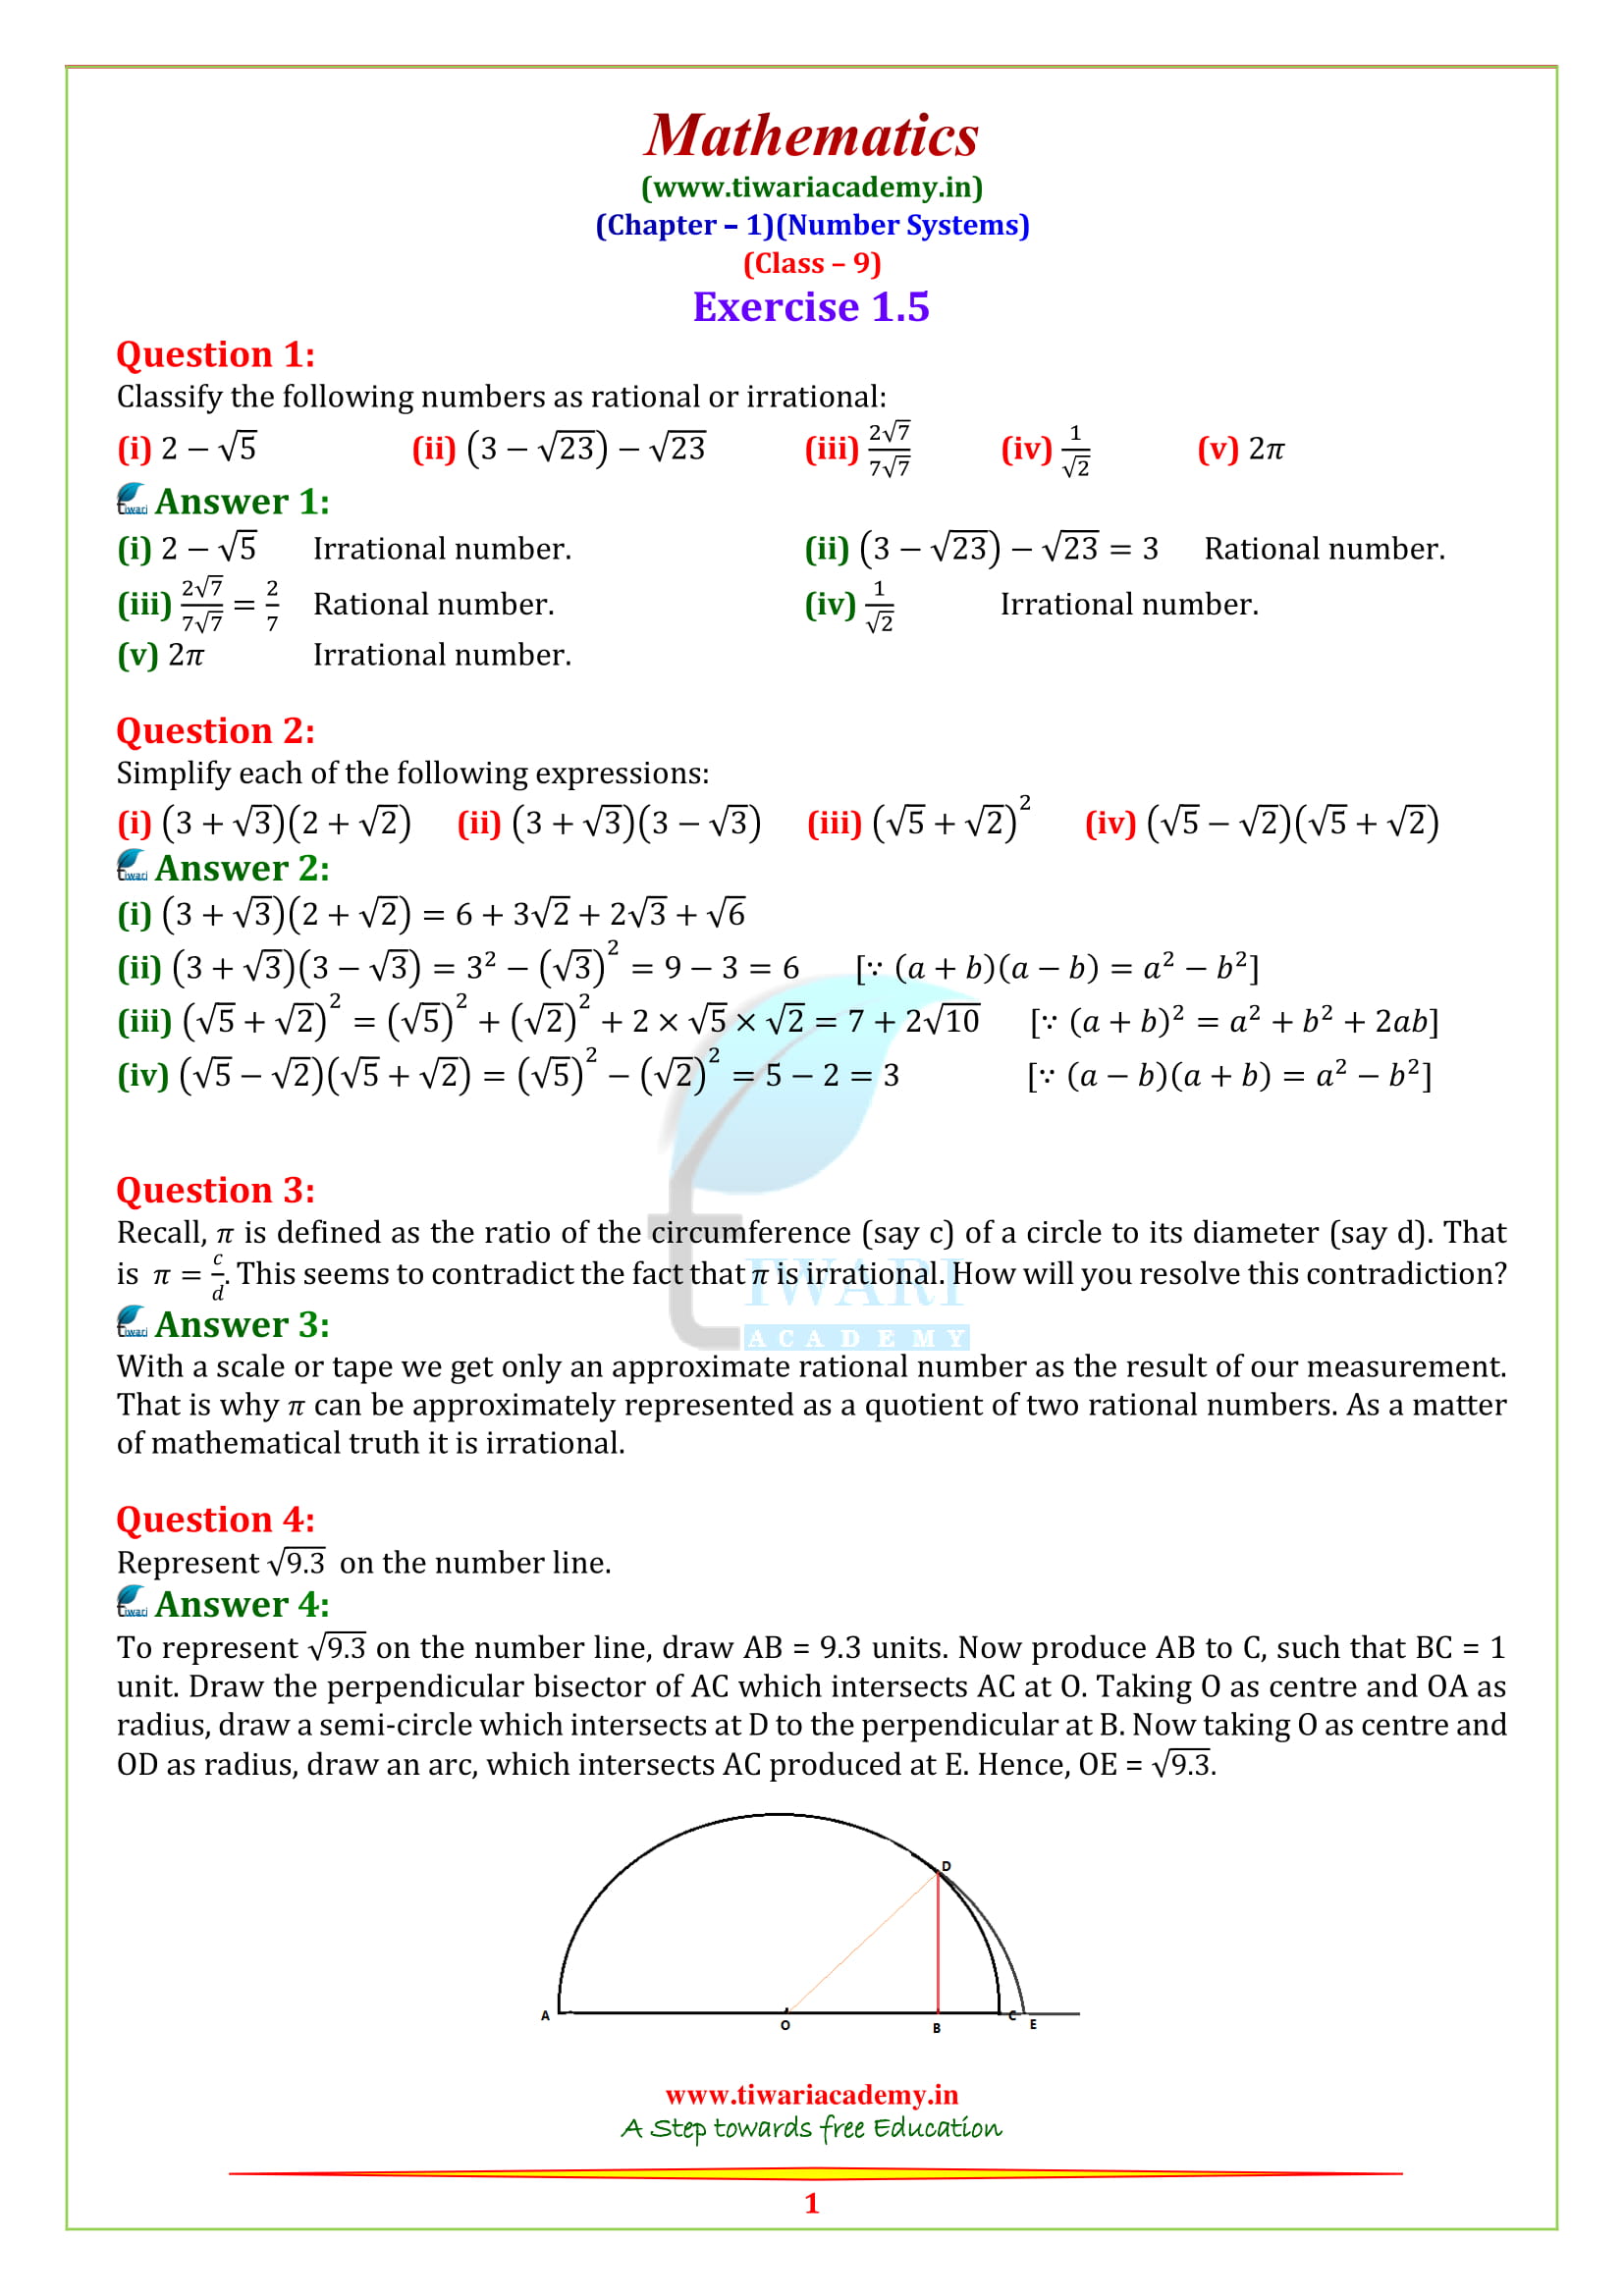 ncert-solutions-for-class-9-maths-chapter-1-exercise-1-5-number-system